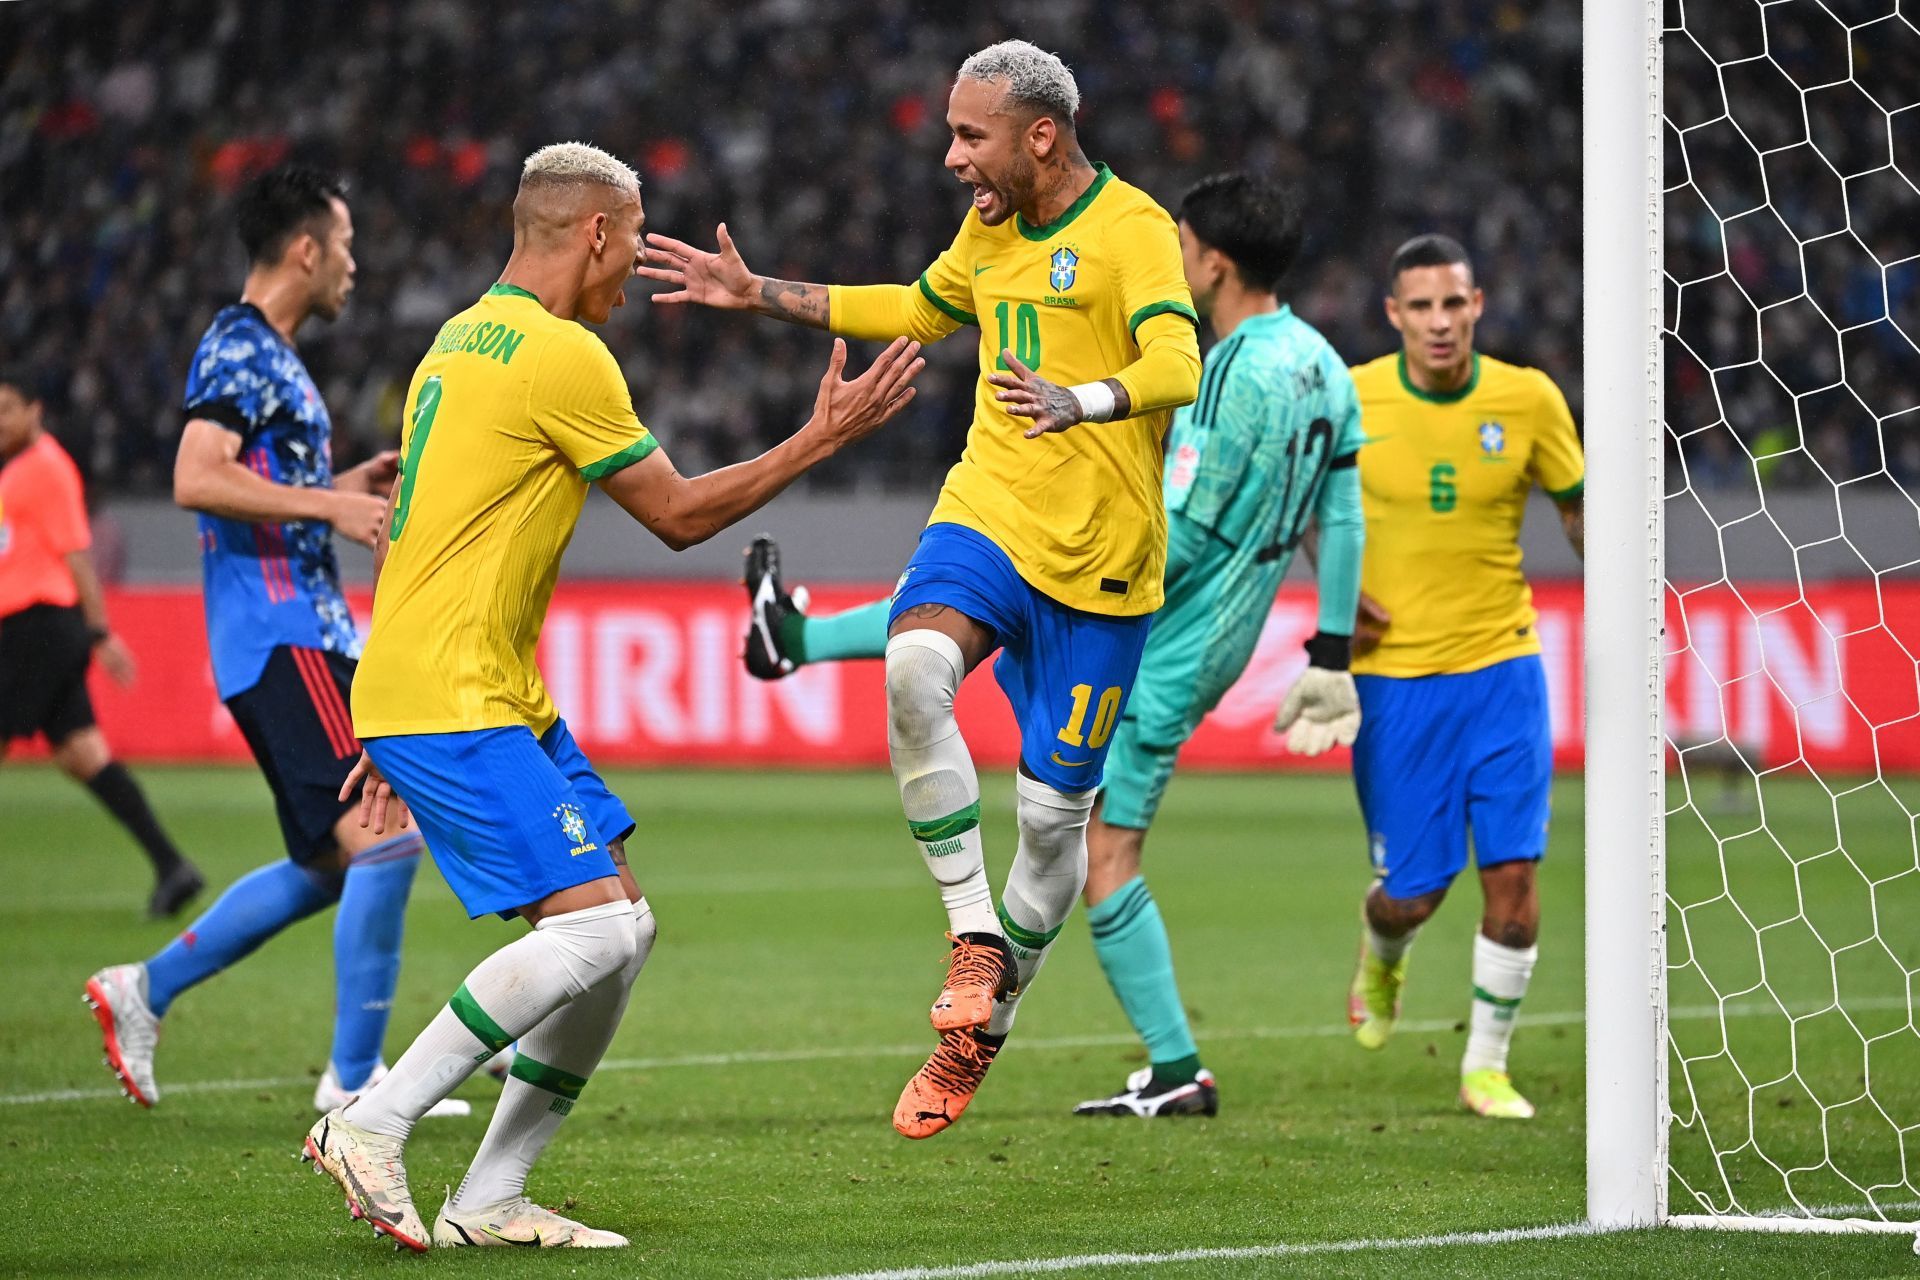 According to latest FIFA rankings, Brazil are the top footballing nation in the world